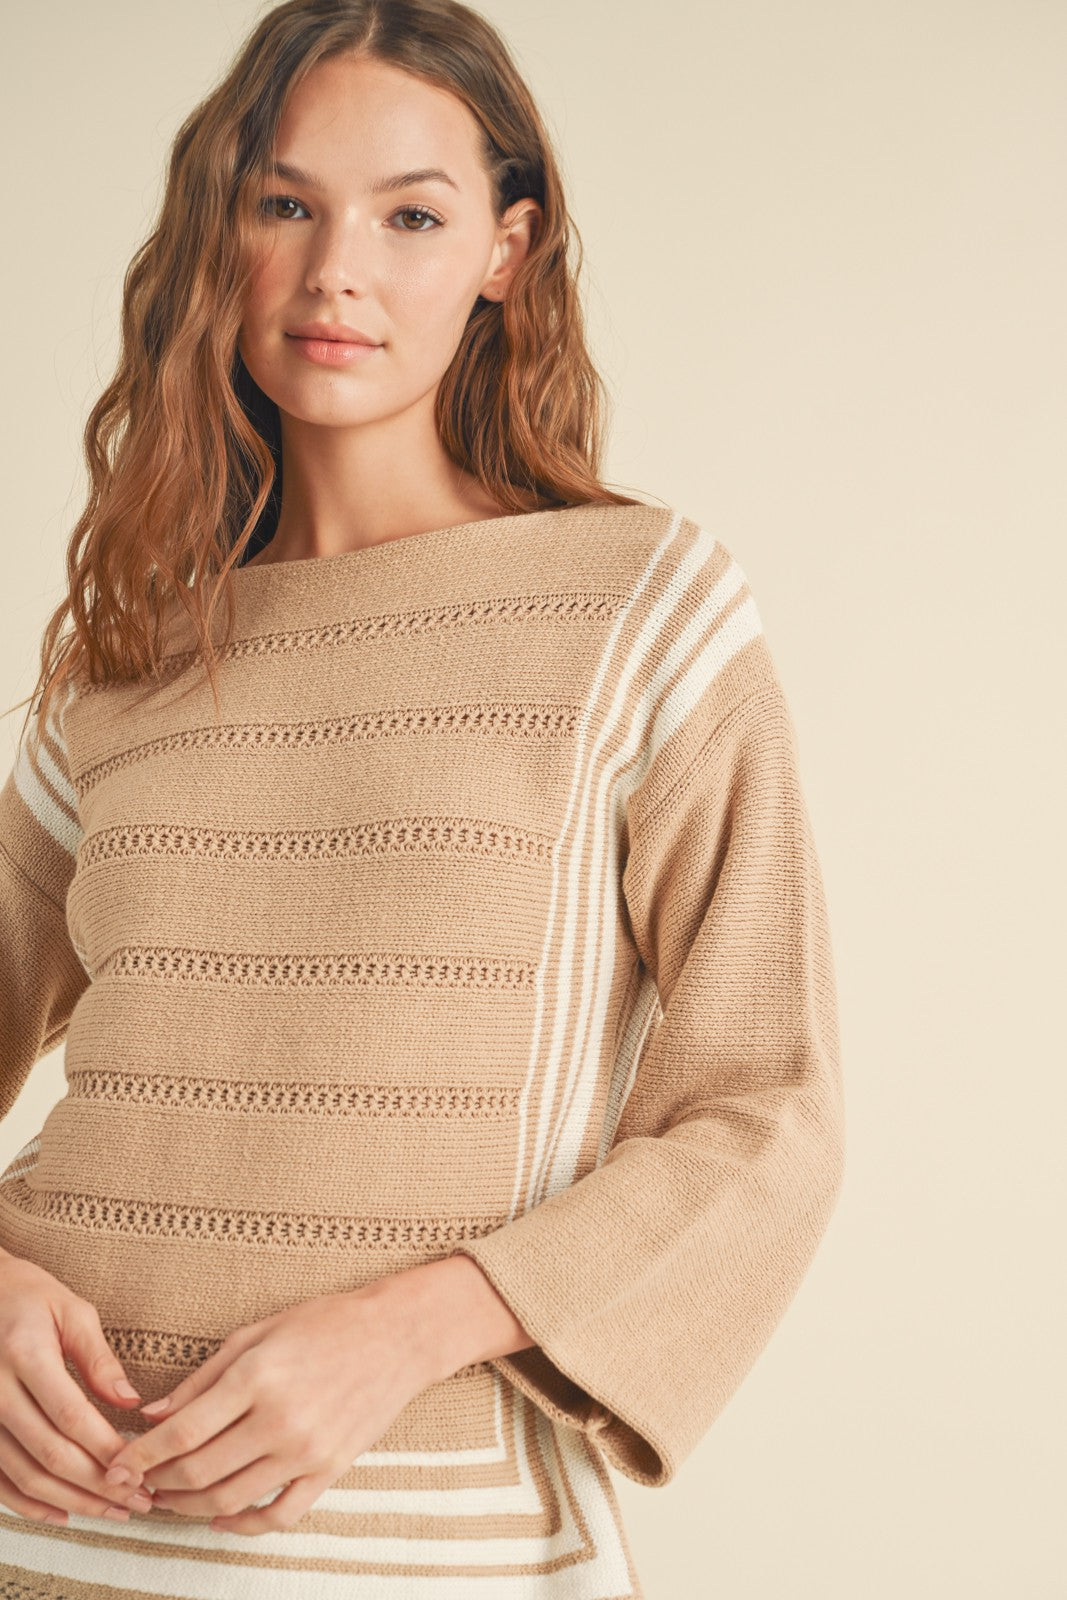 Boat Neck Sweater in Taupe